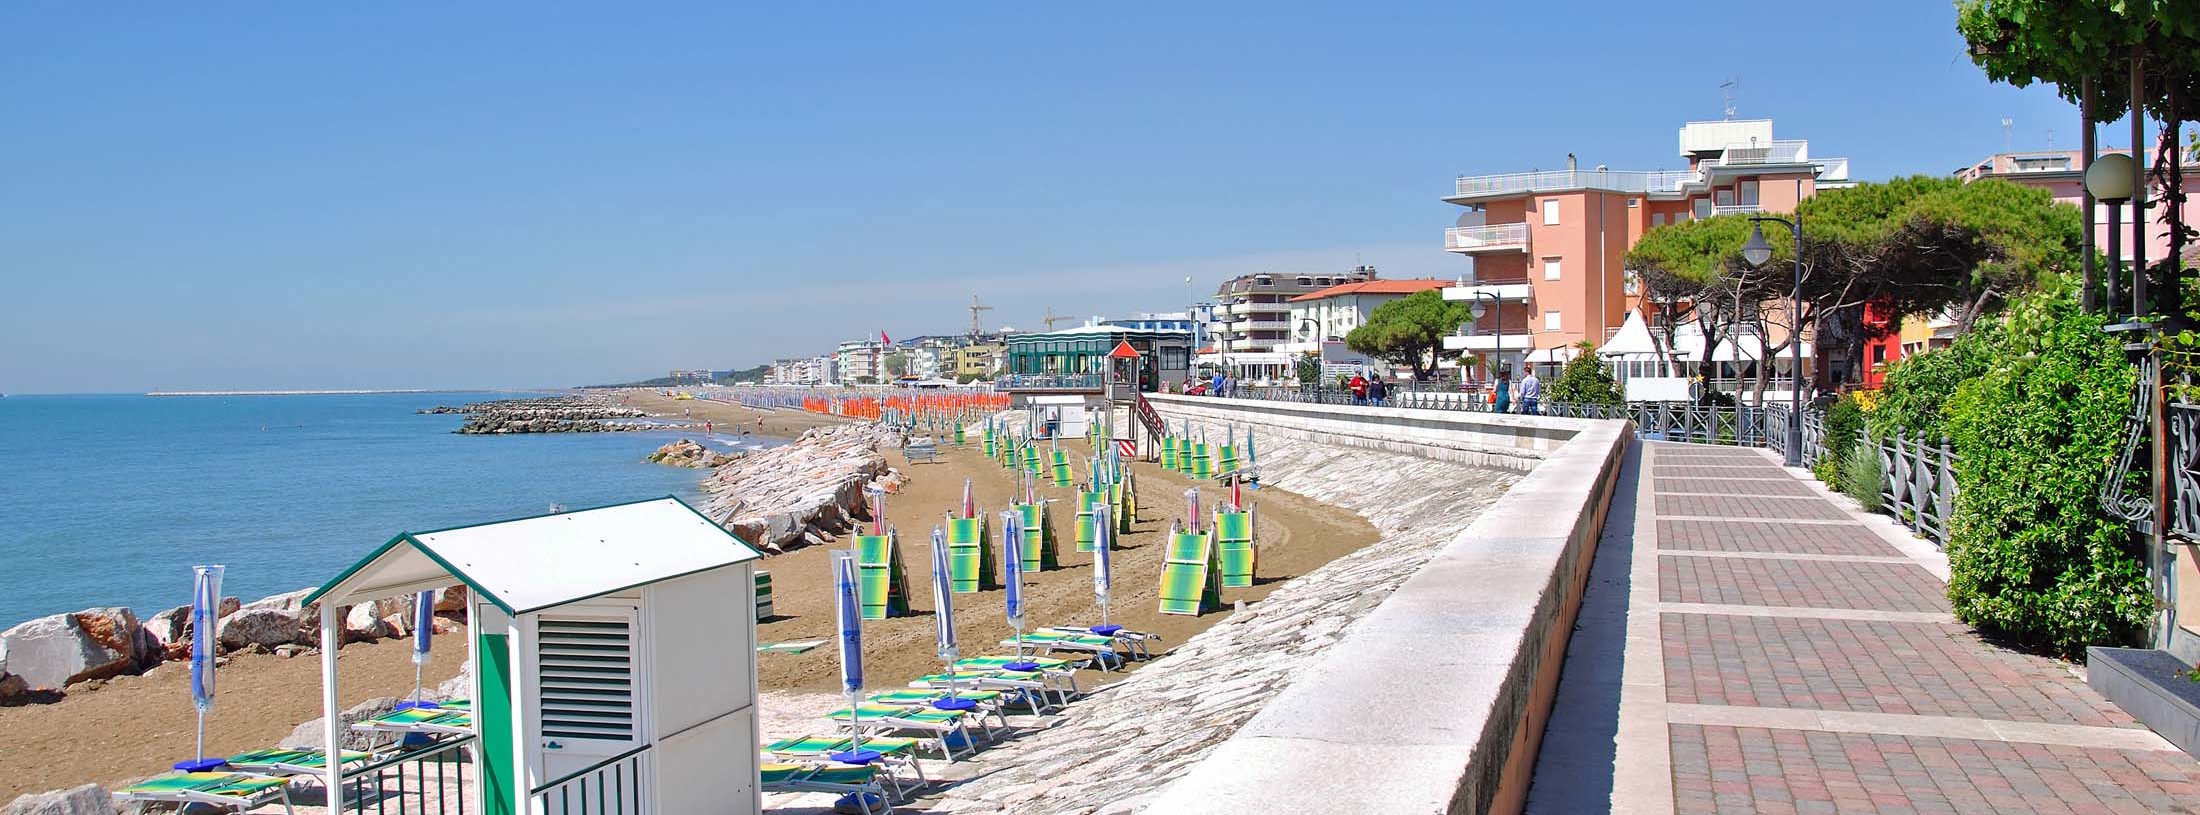 caorle-hotel-and-accommodation-for-your-holiday-by-car-or-by-plane